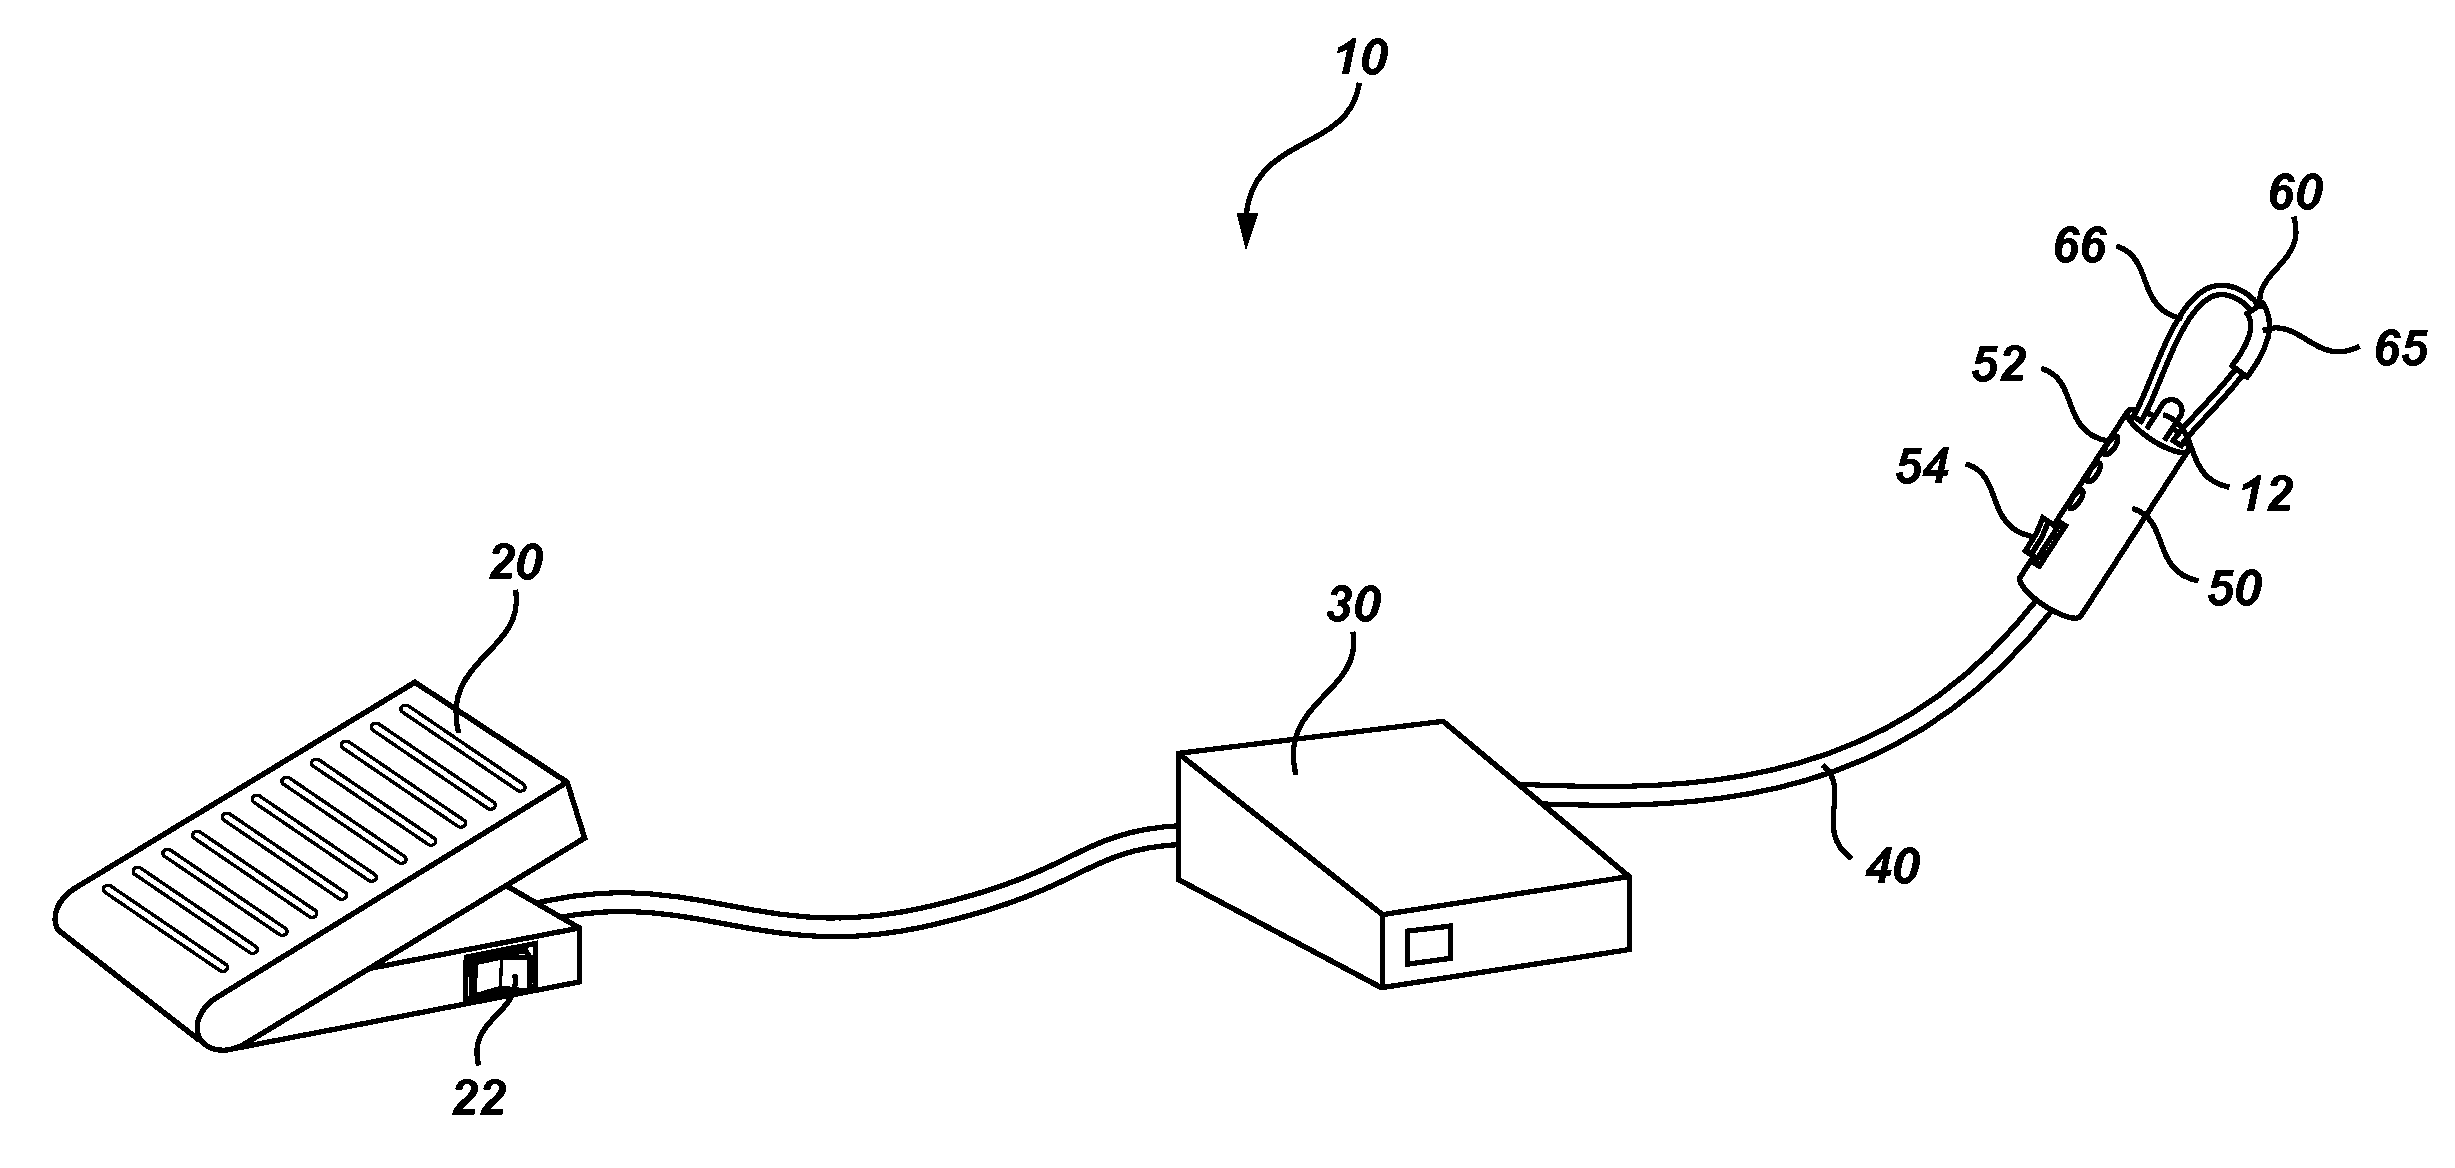 Method of treatment with adjustable ferromagnetic coated conductor thermal surgical tool